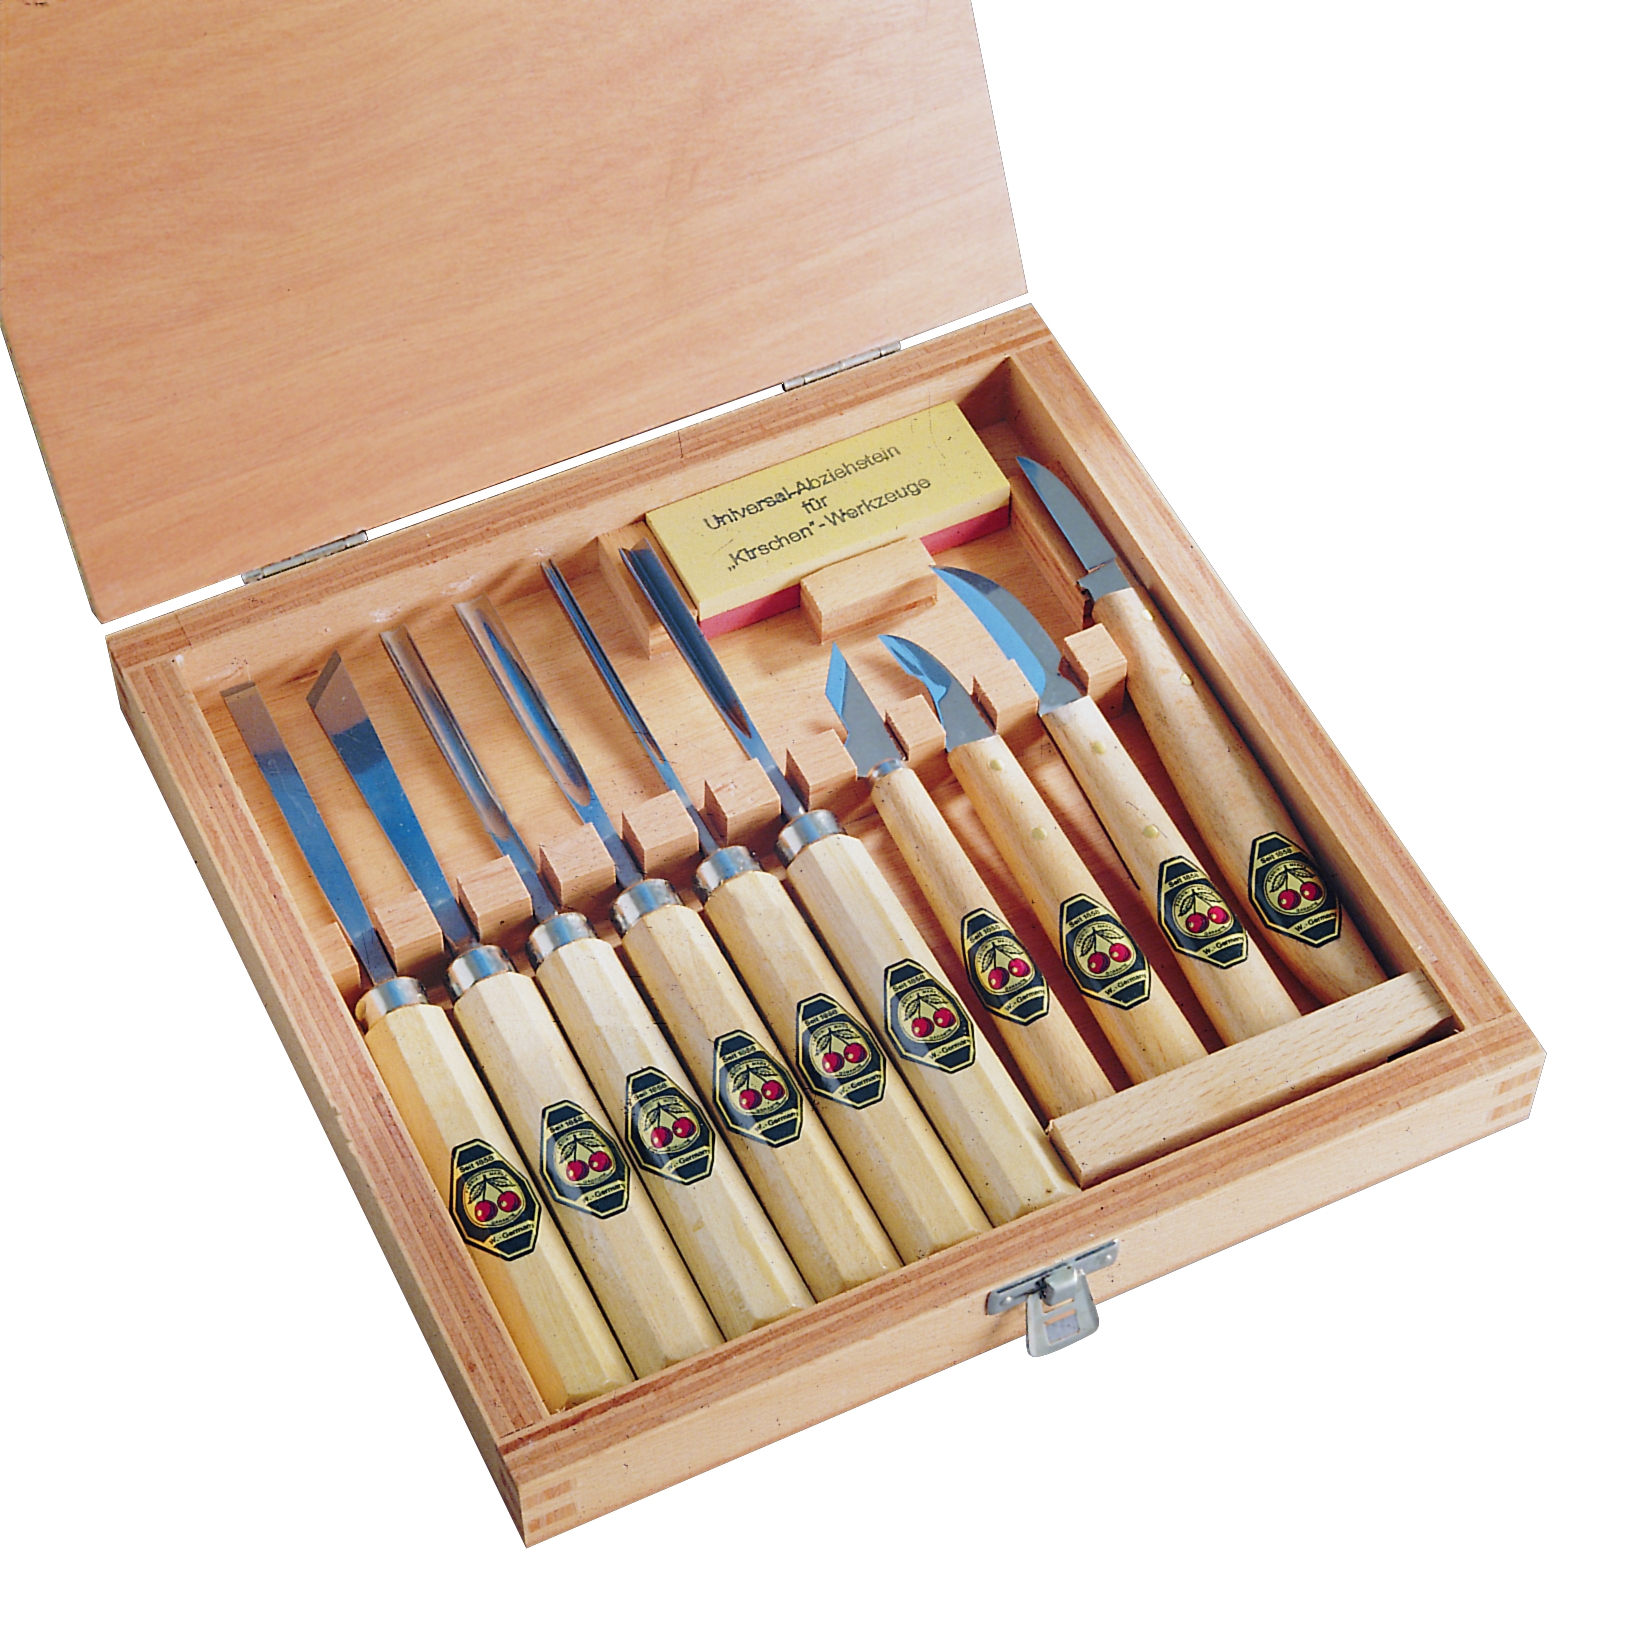 SET OF 11 CARVING TOOLS IN WOODEN BOX - Robert Larson Company